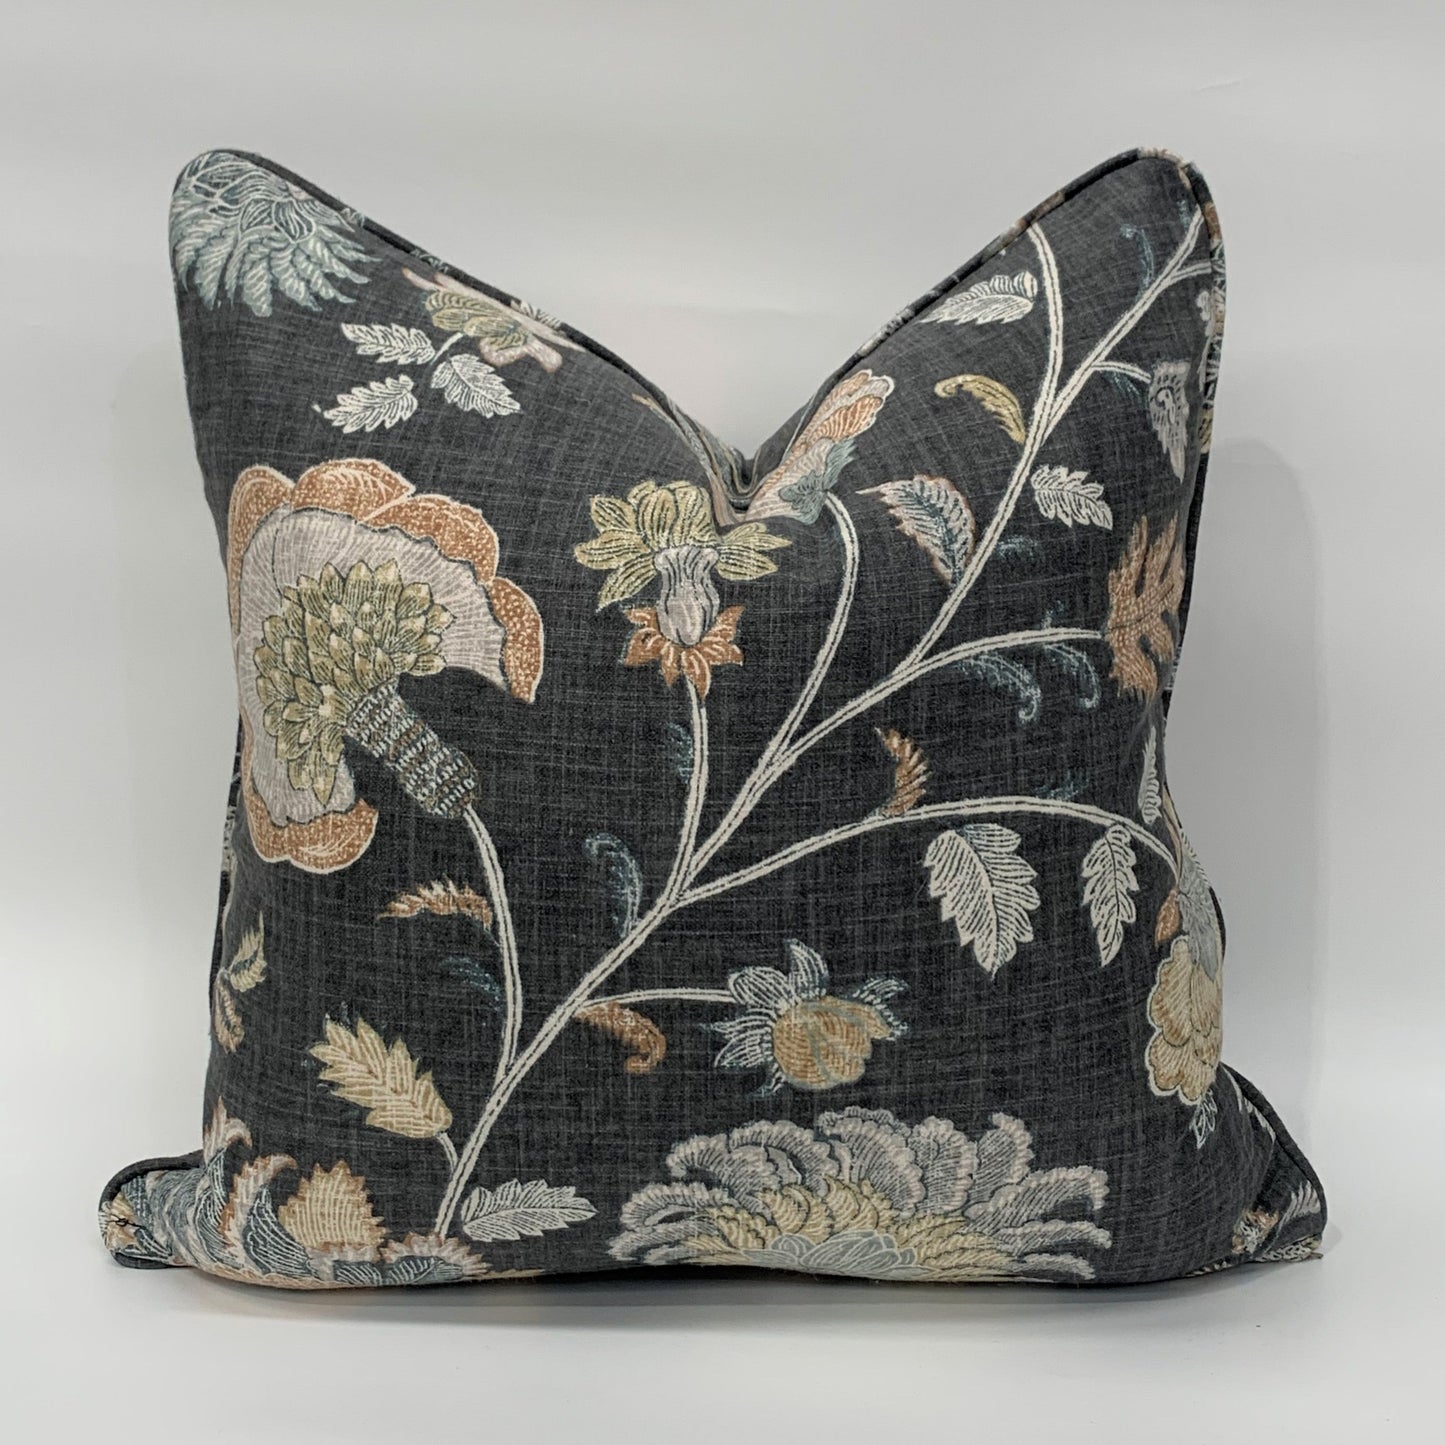 This beautiful Graphite Floral Linen Cushion from Richloom Fabrics is exquisitely crafted from a sumptuous heavyweight fabric. With a soft floral pattern and subtle hues against a dark grey backdrop, it adds a timelessly graceful and elegant touch to any home decor. Includes a luxurious feather insert.